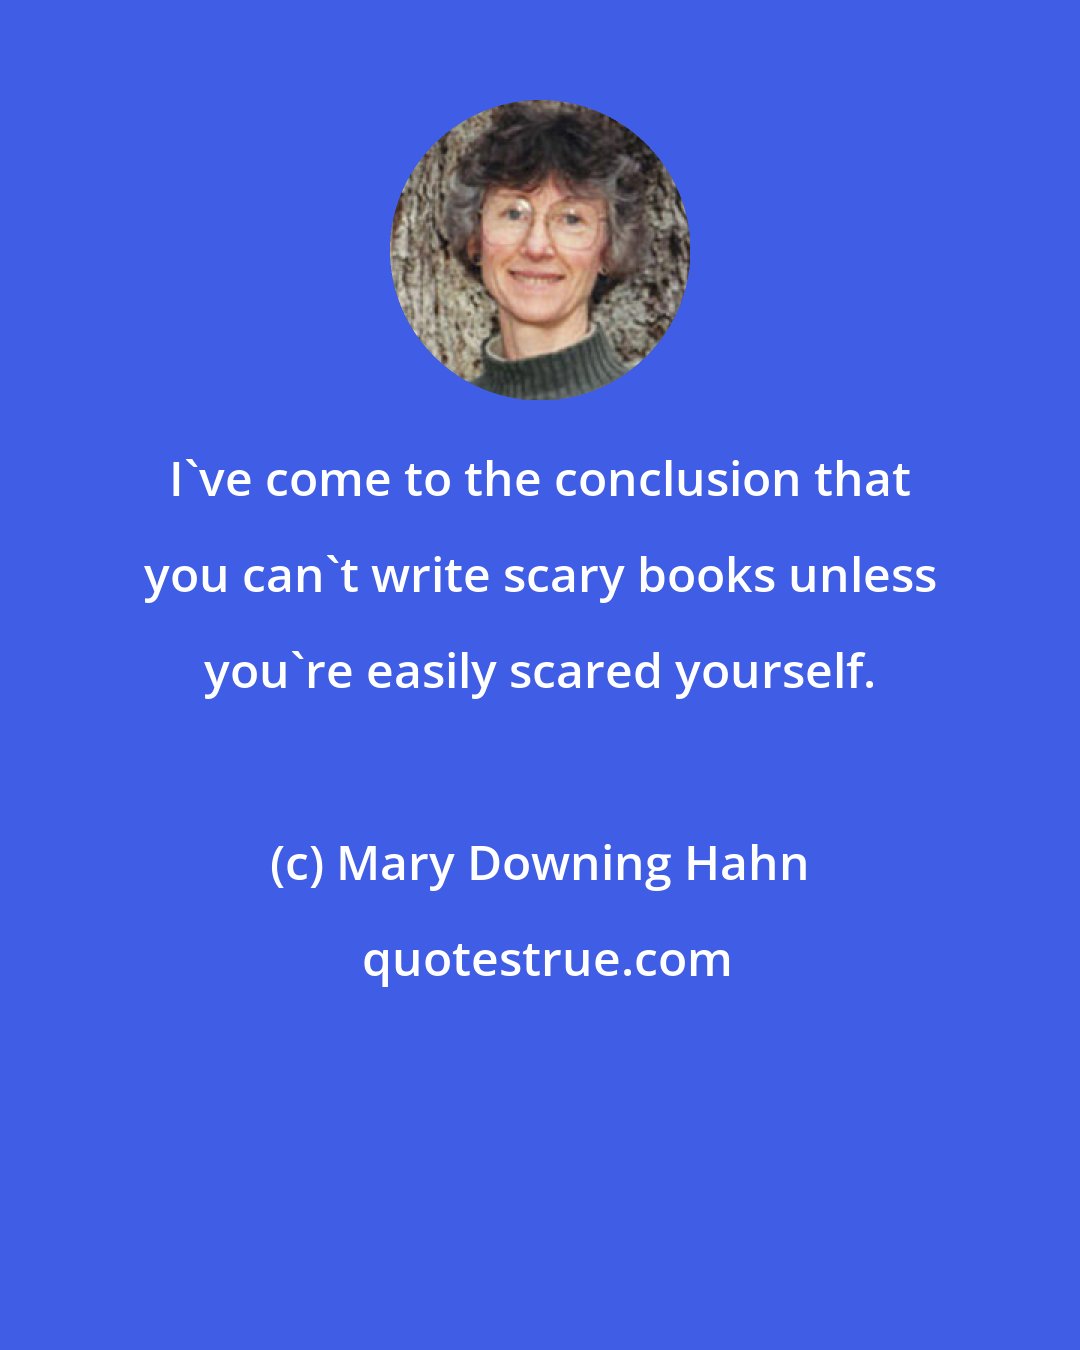 Mary Downing Hahn: I've come to the conclusion that you can't write scary books unless you're easily scared yourself.